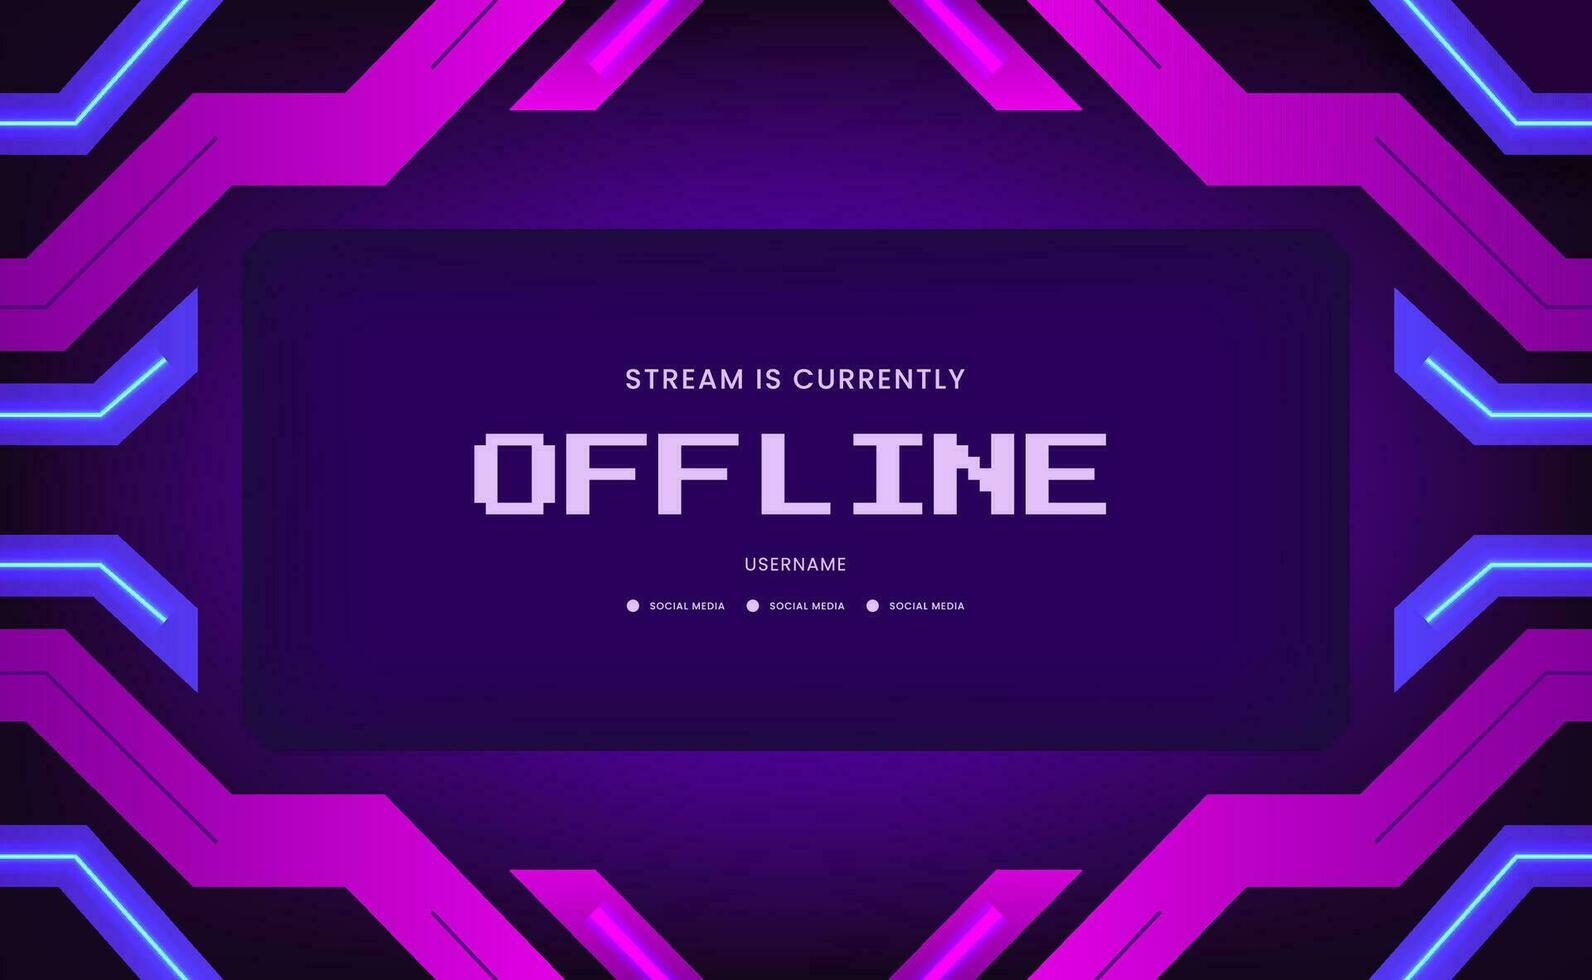 Offline Hud stream gaming window screen with geometric dynamic cyber vibrant vector